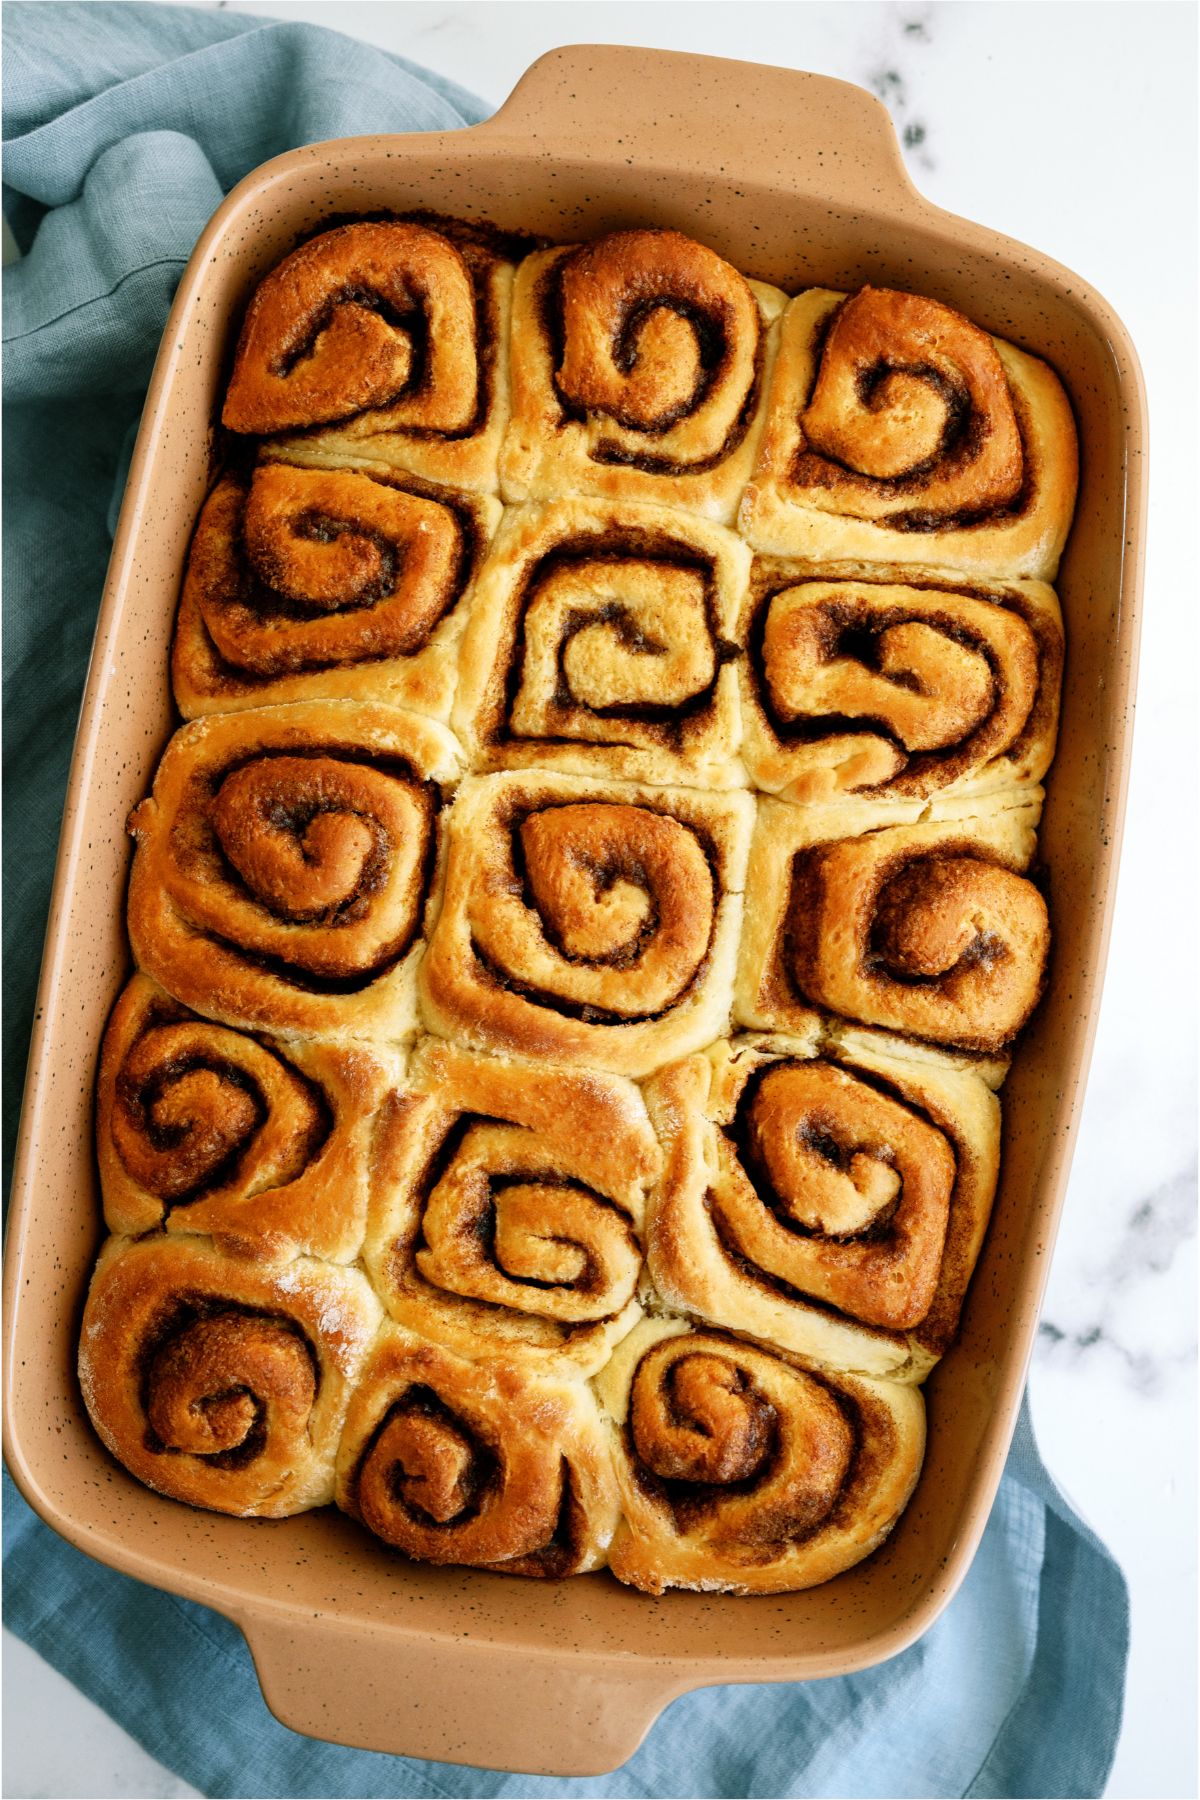 Baked and Unfrosted Homemade Cinnamon Rolls in a pan